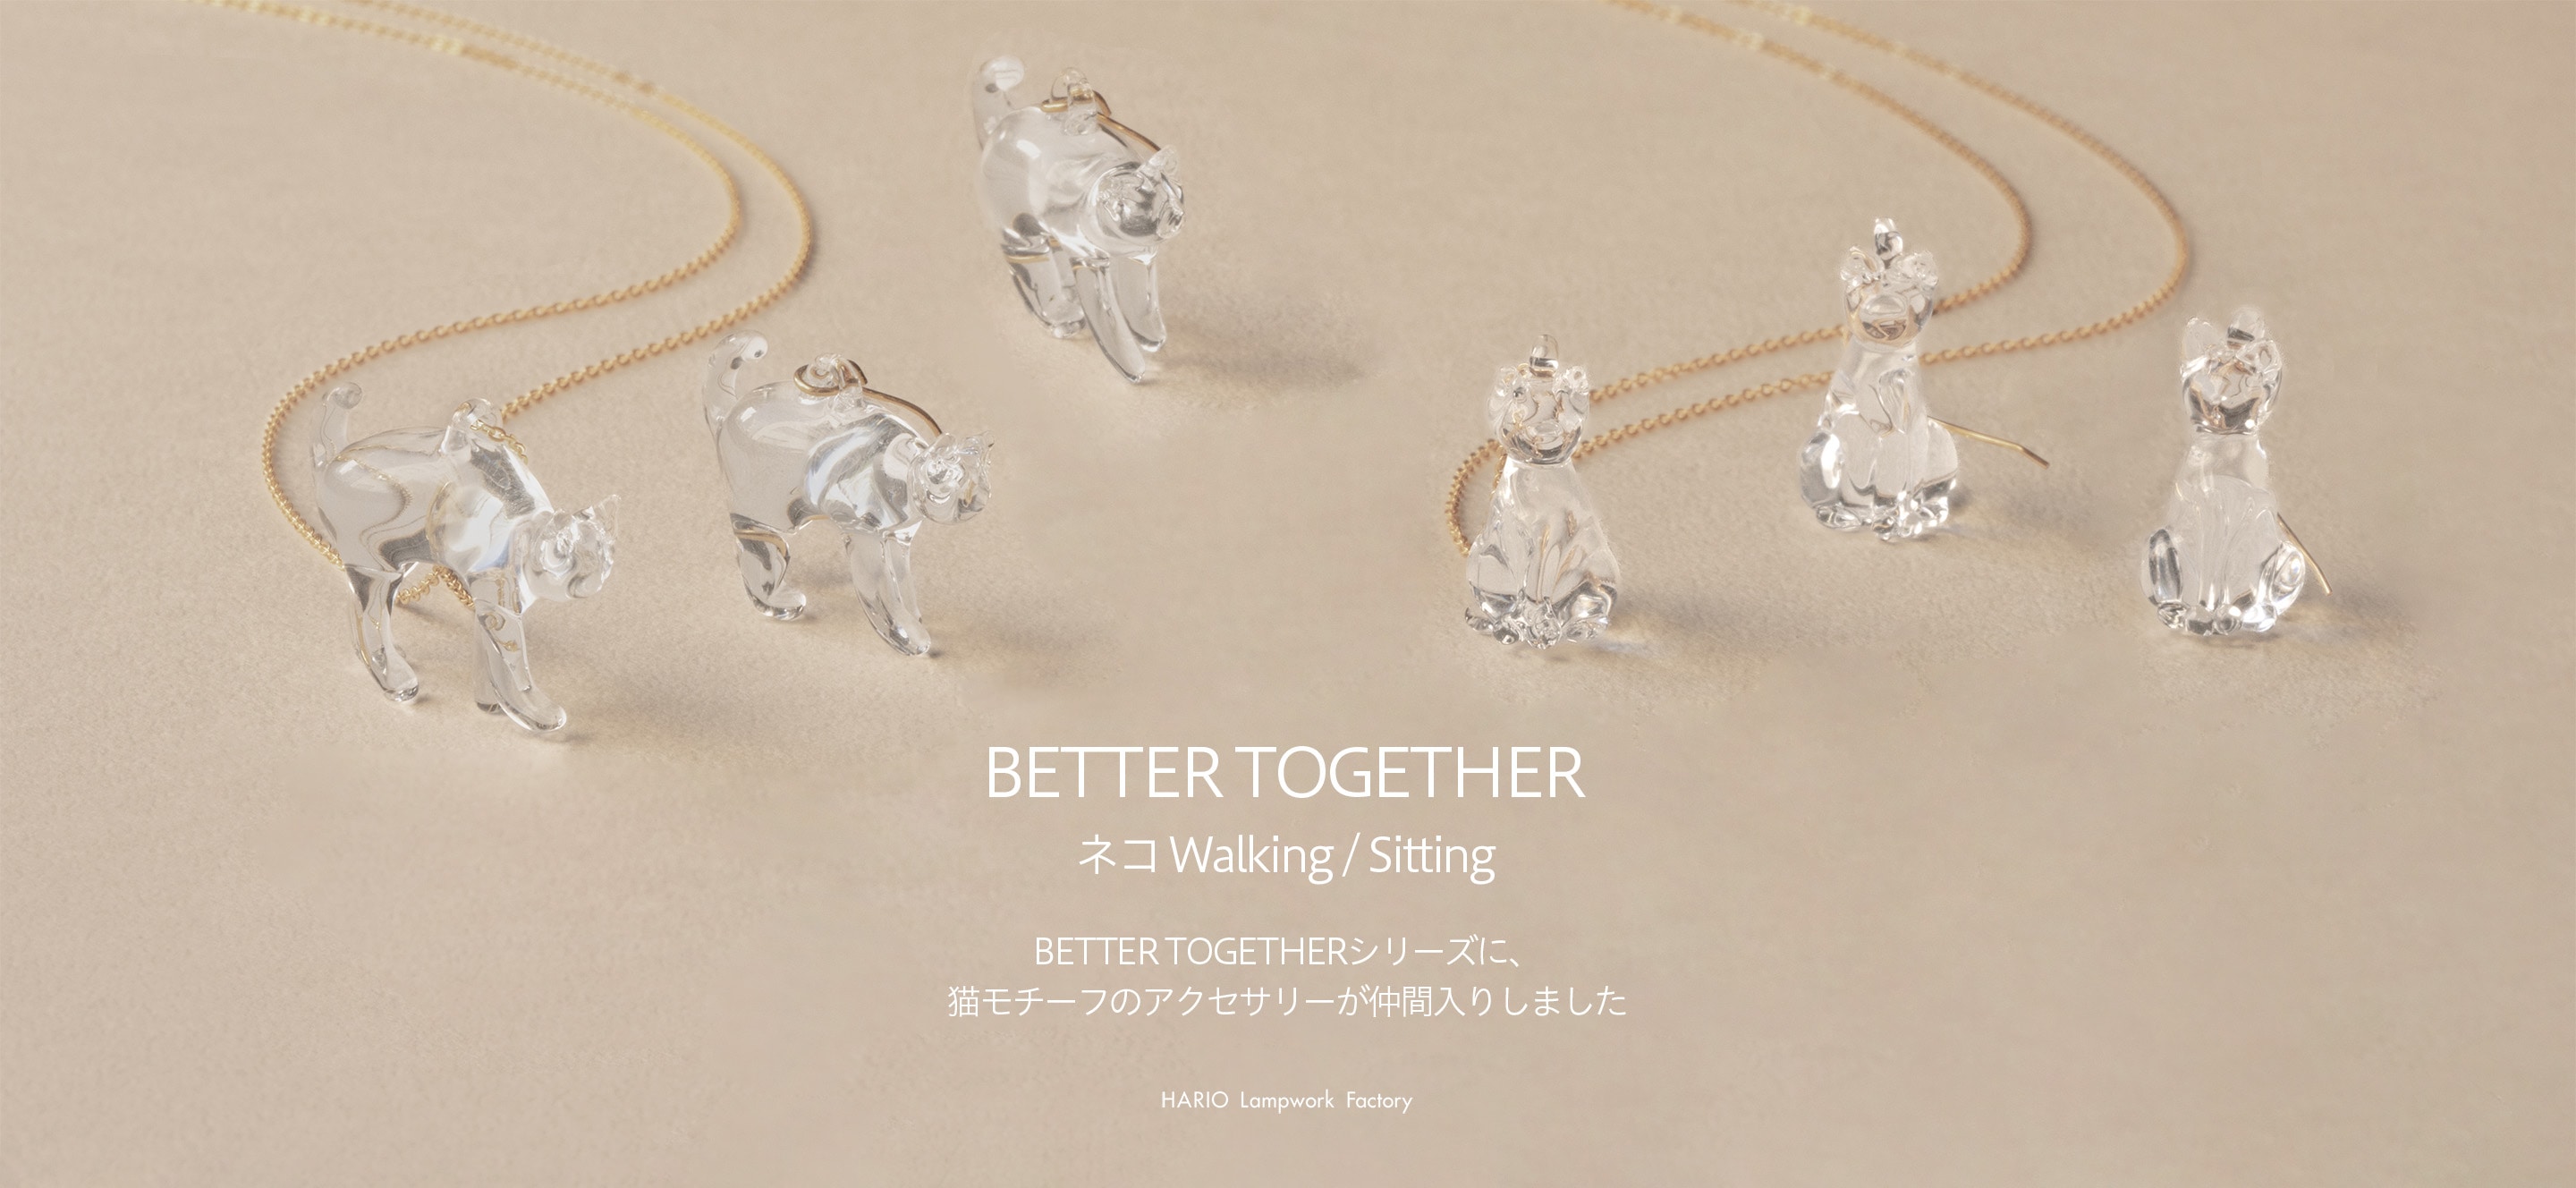 BETTER TOGETHER ネコ